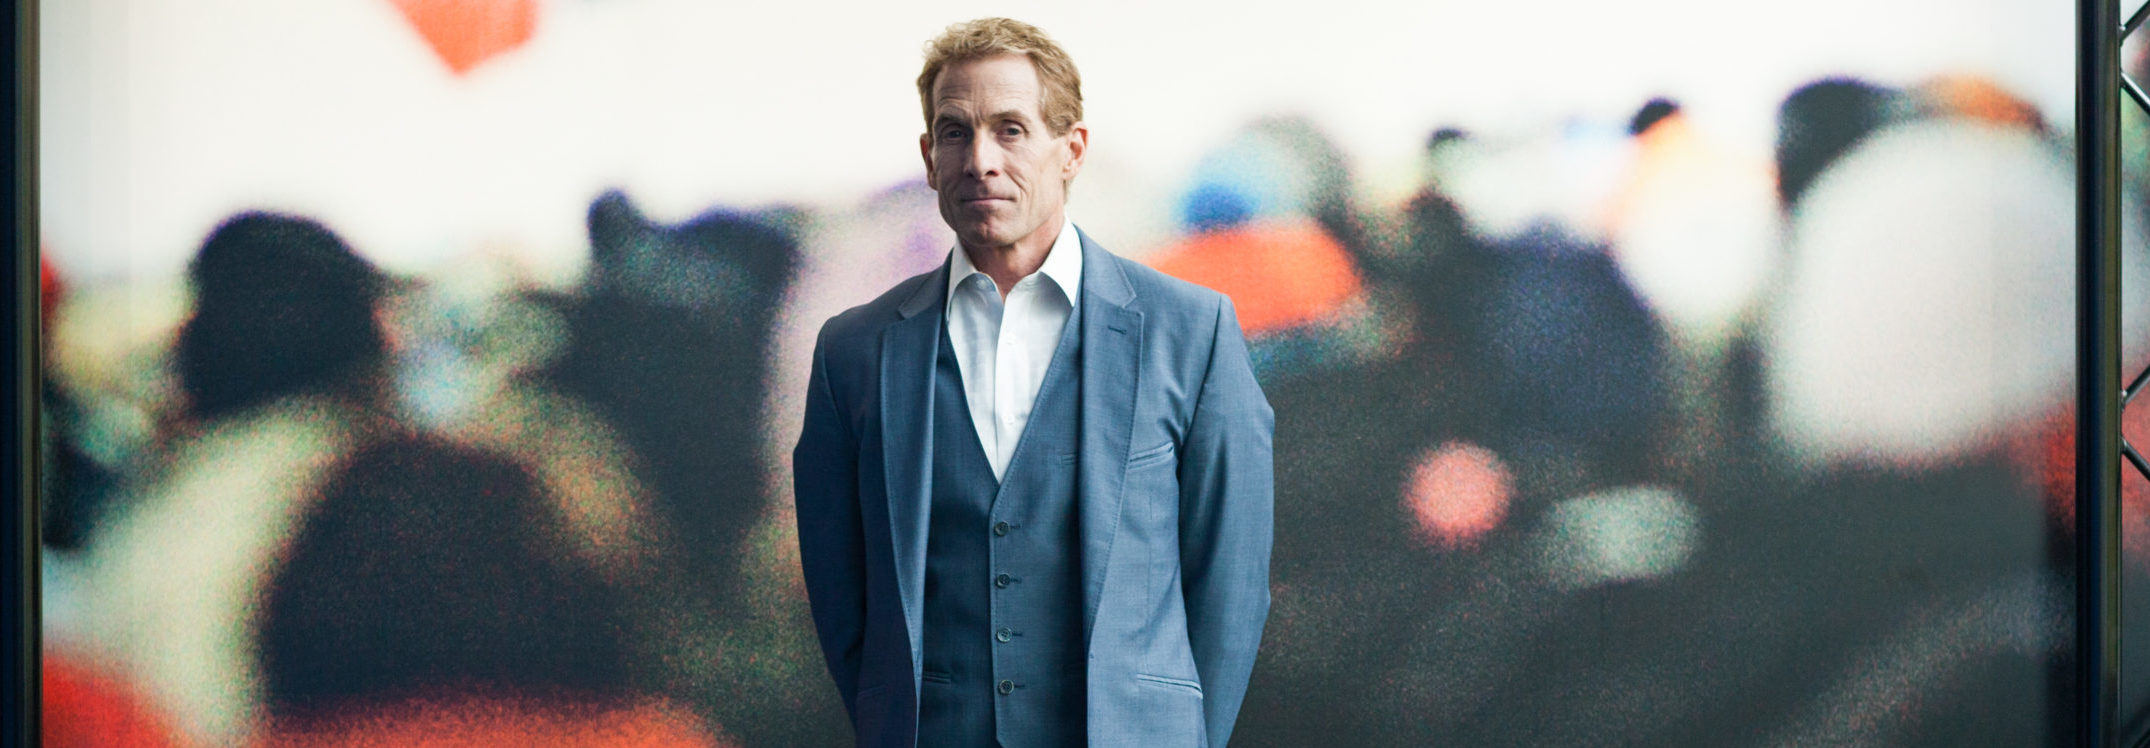 Profile of ESPN Personality Skip Bayless